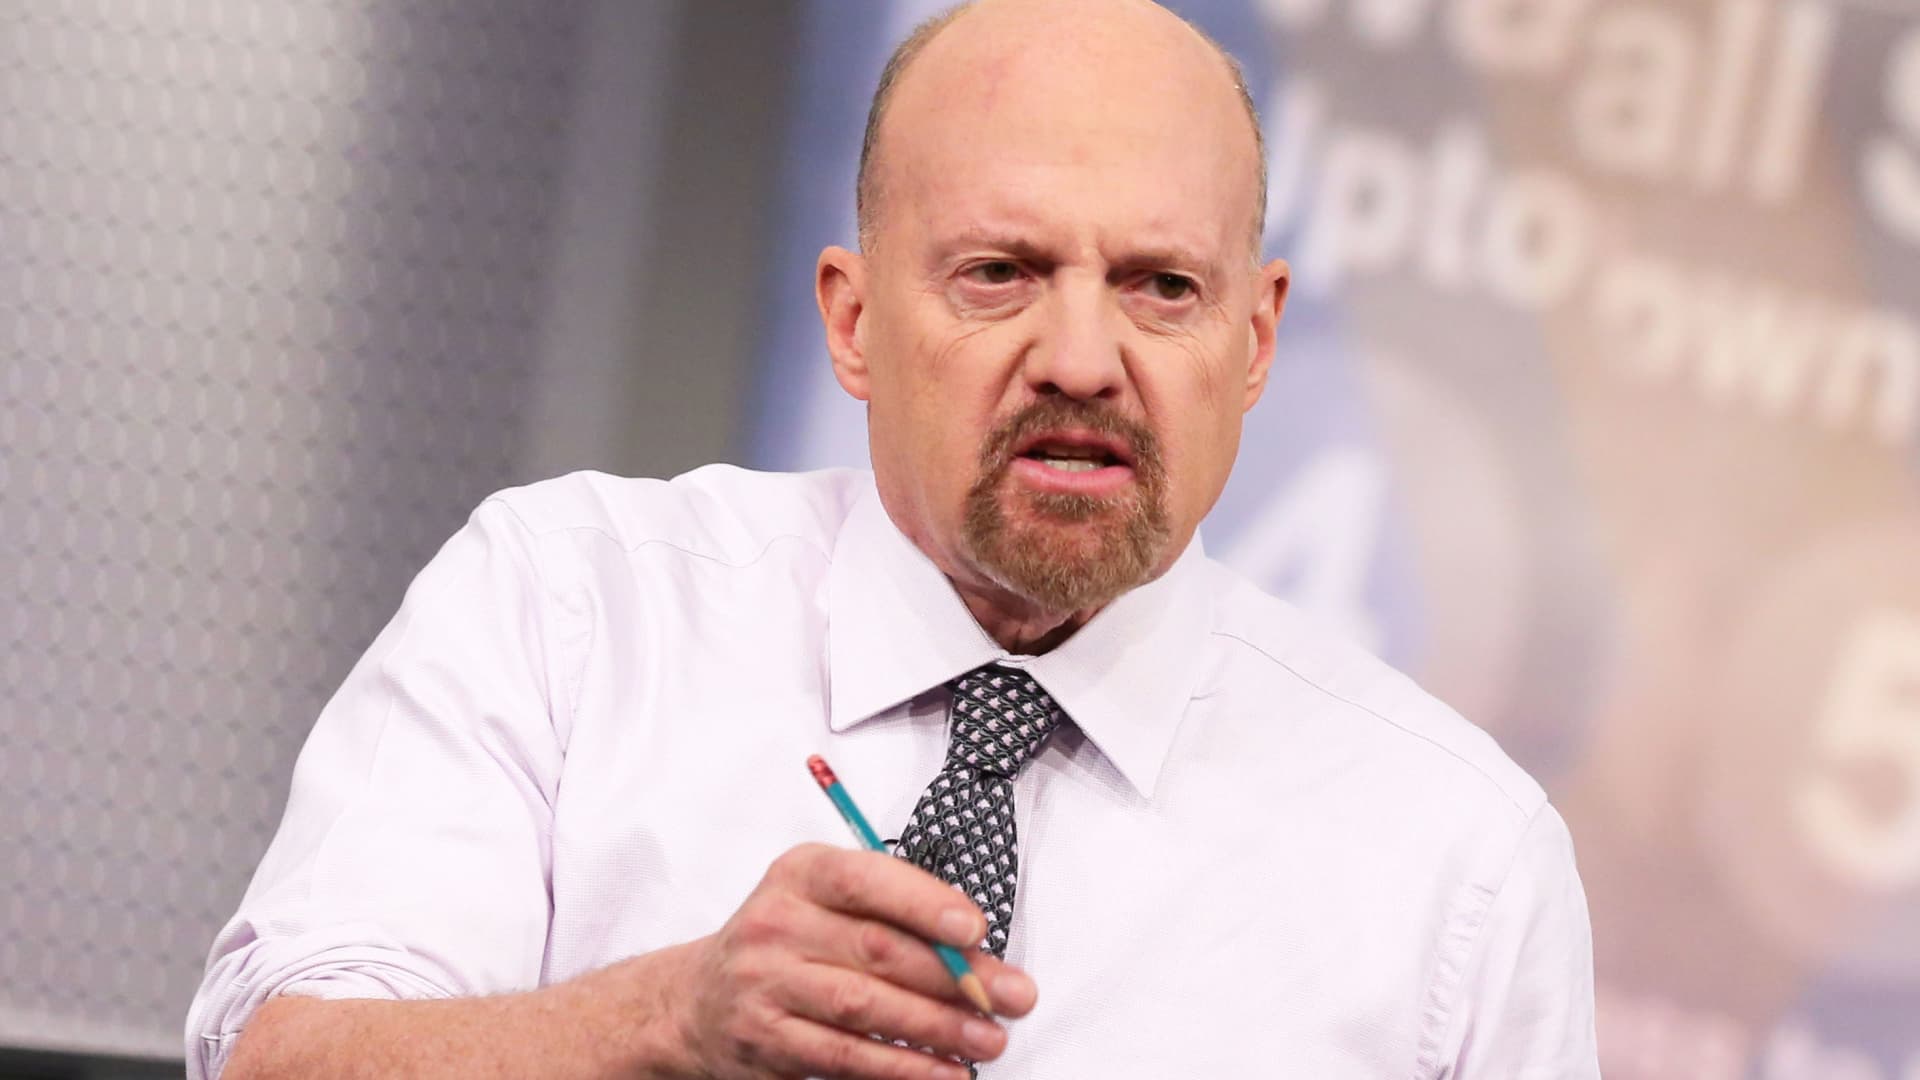 jim-cramer-says-these-6-‘positives’-could-help-lift-stocks-during-earnings-season